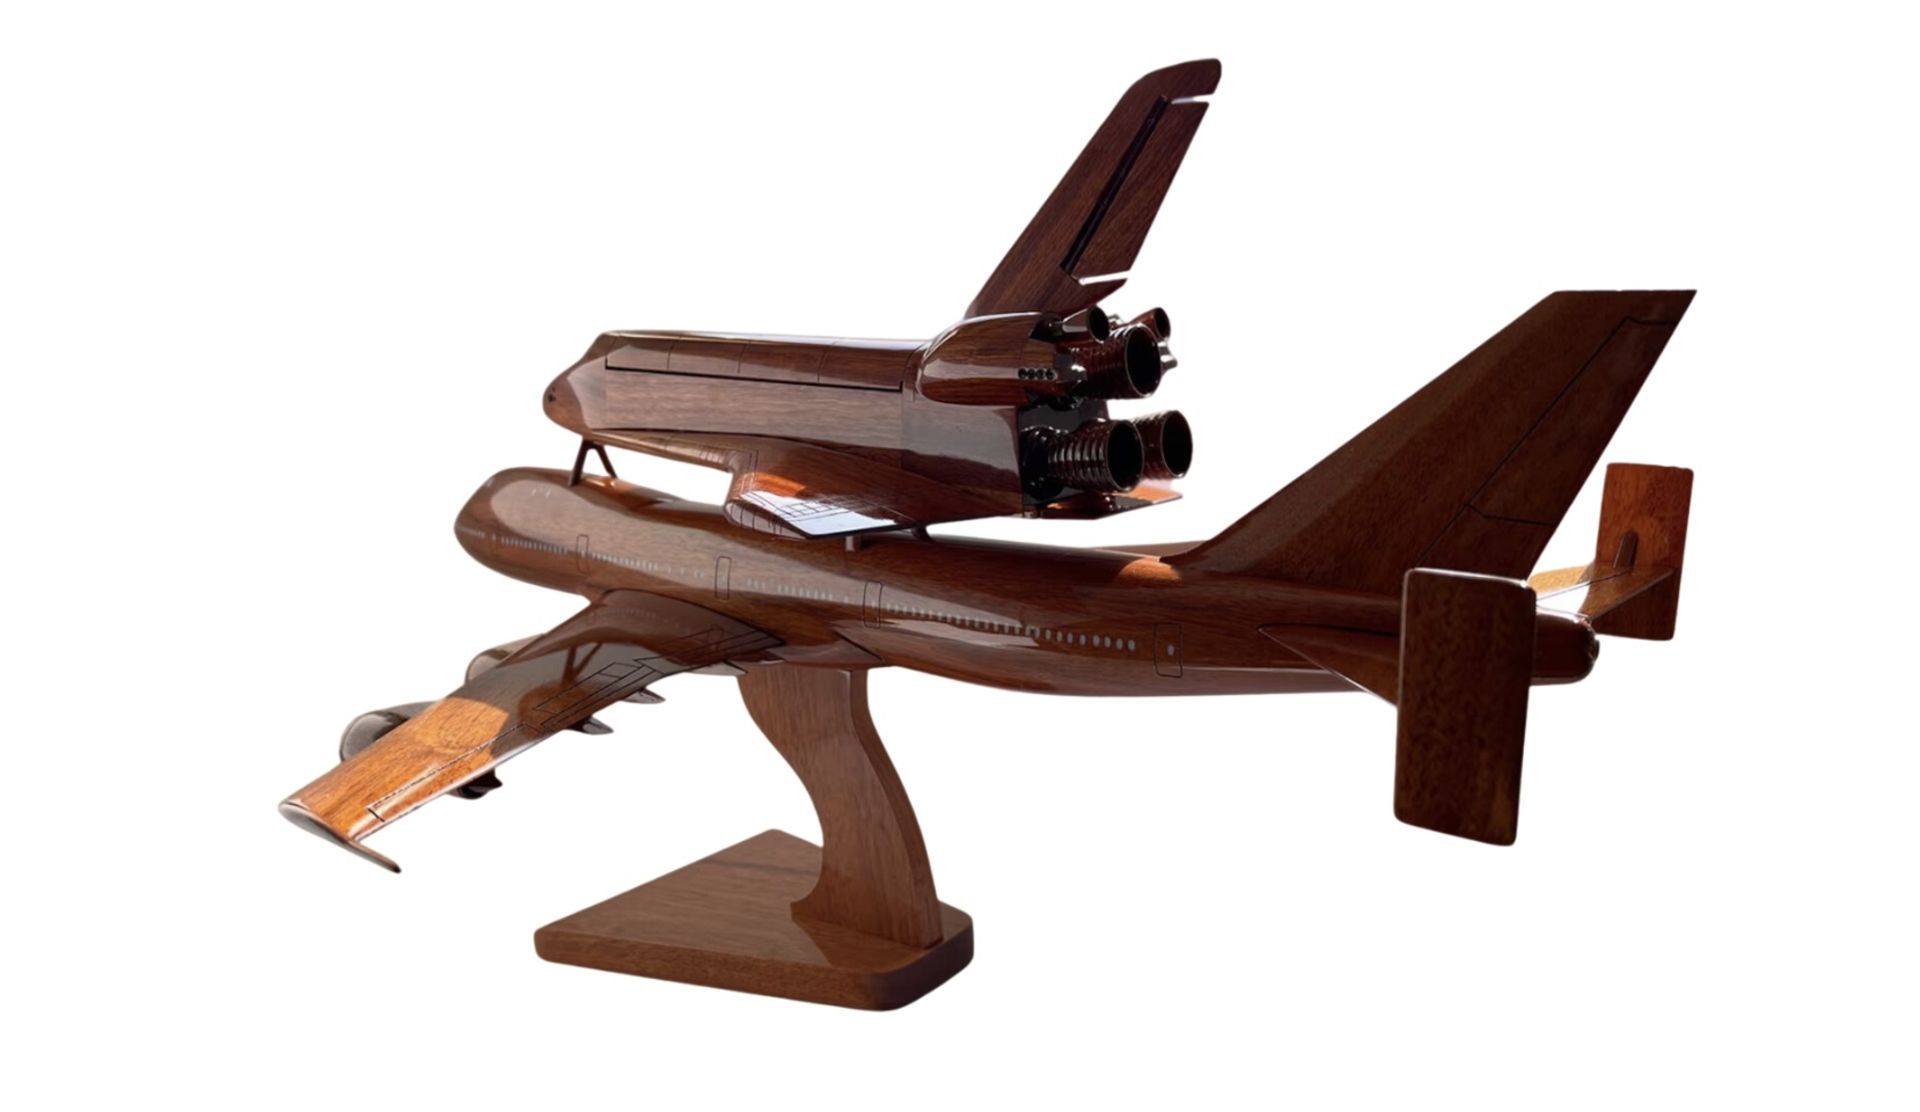 Boeing 747 with Space Shuttle Wooden Scale Model - Image 6 of 8